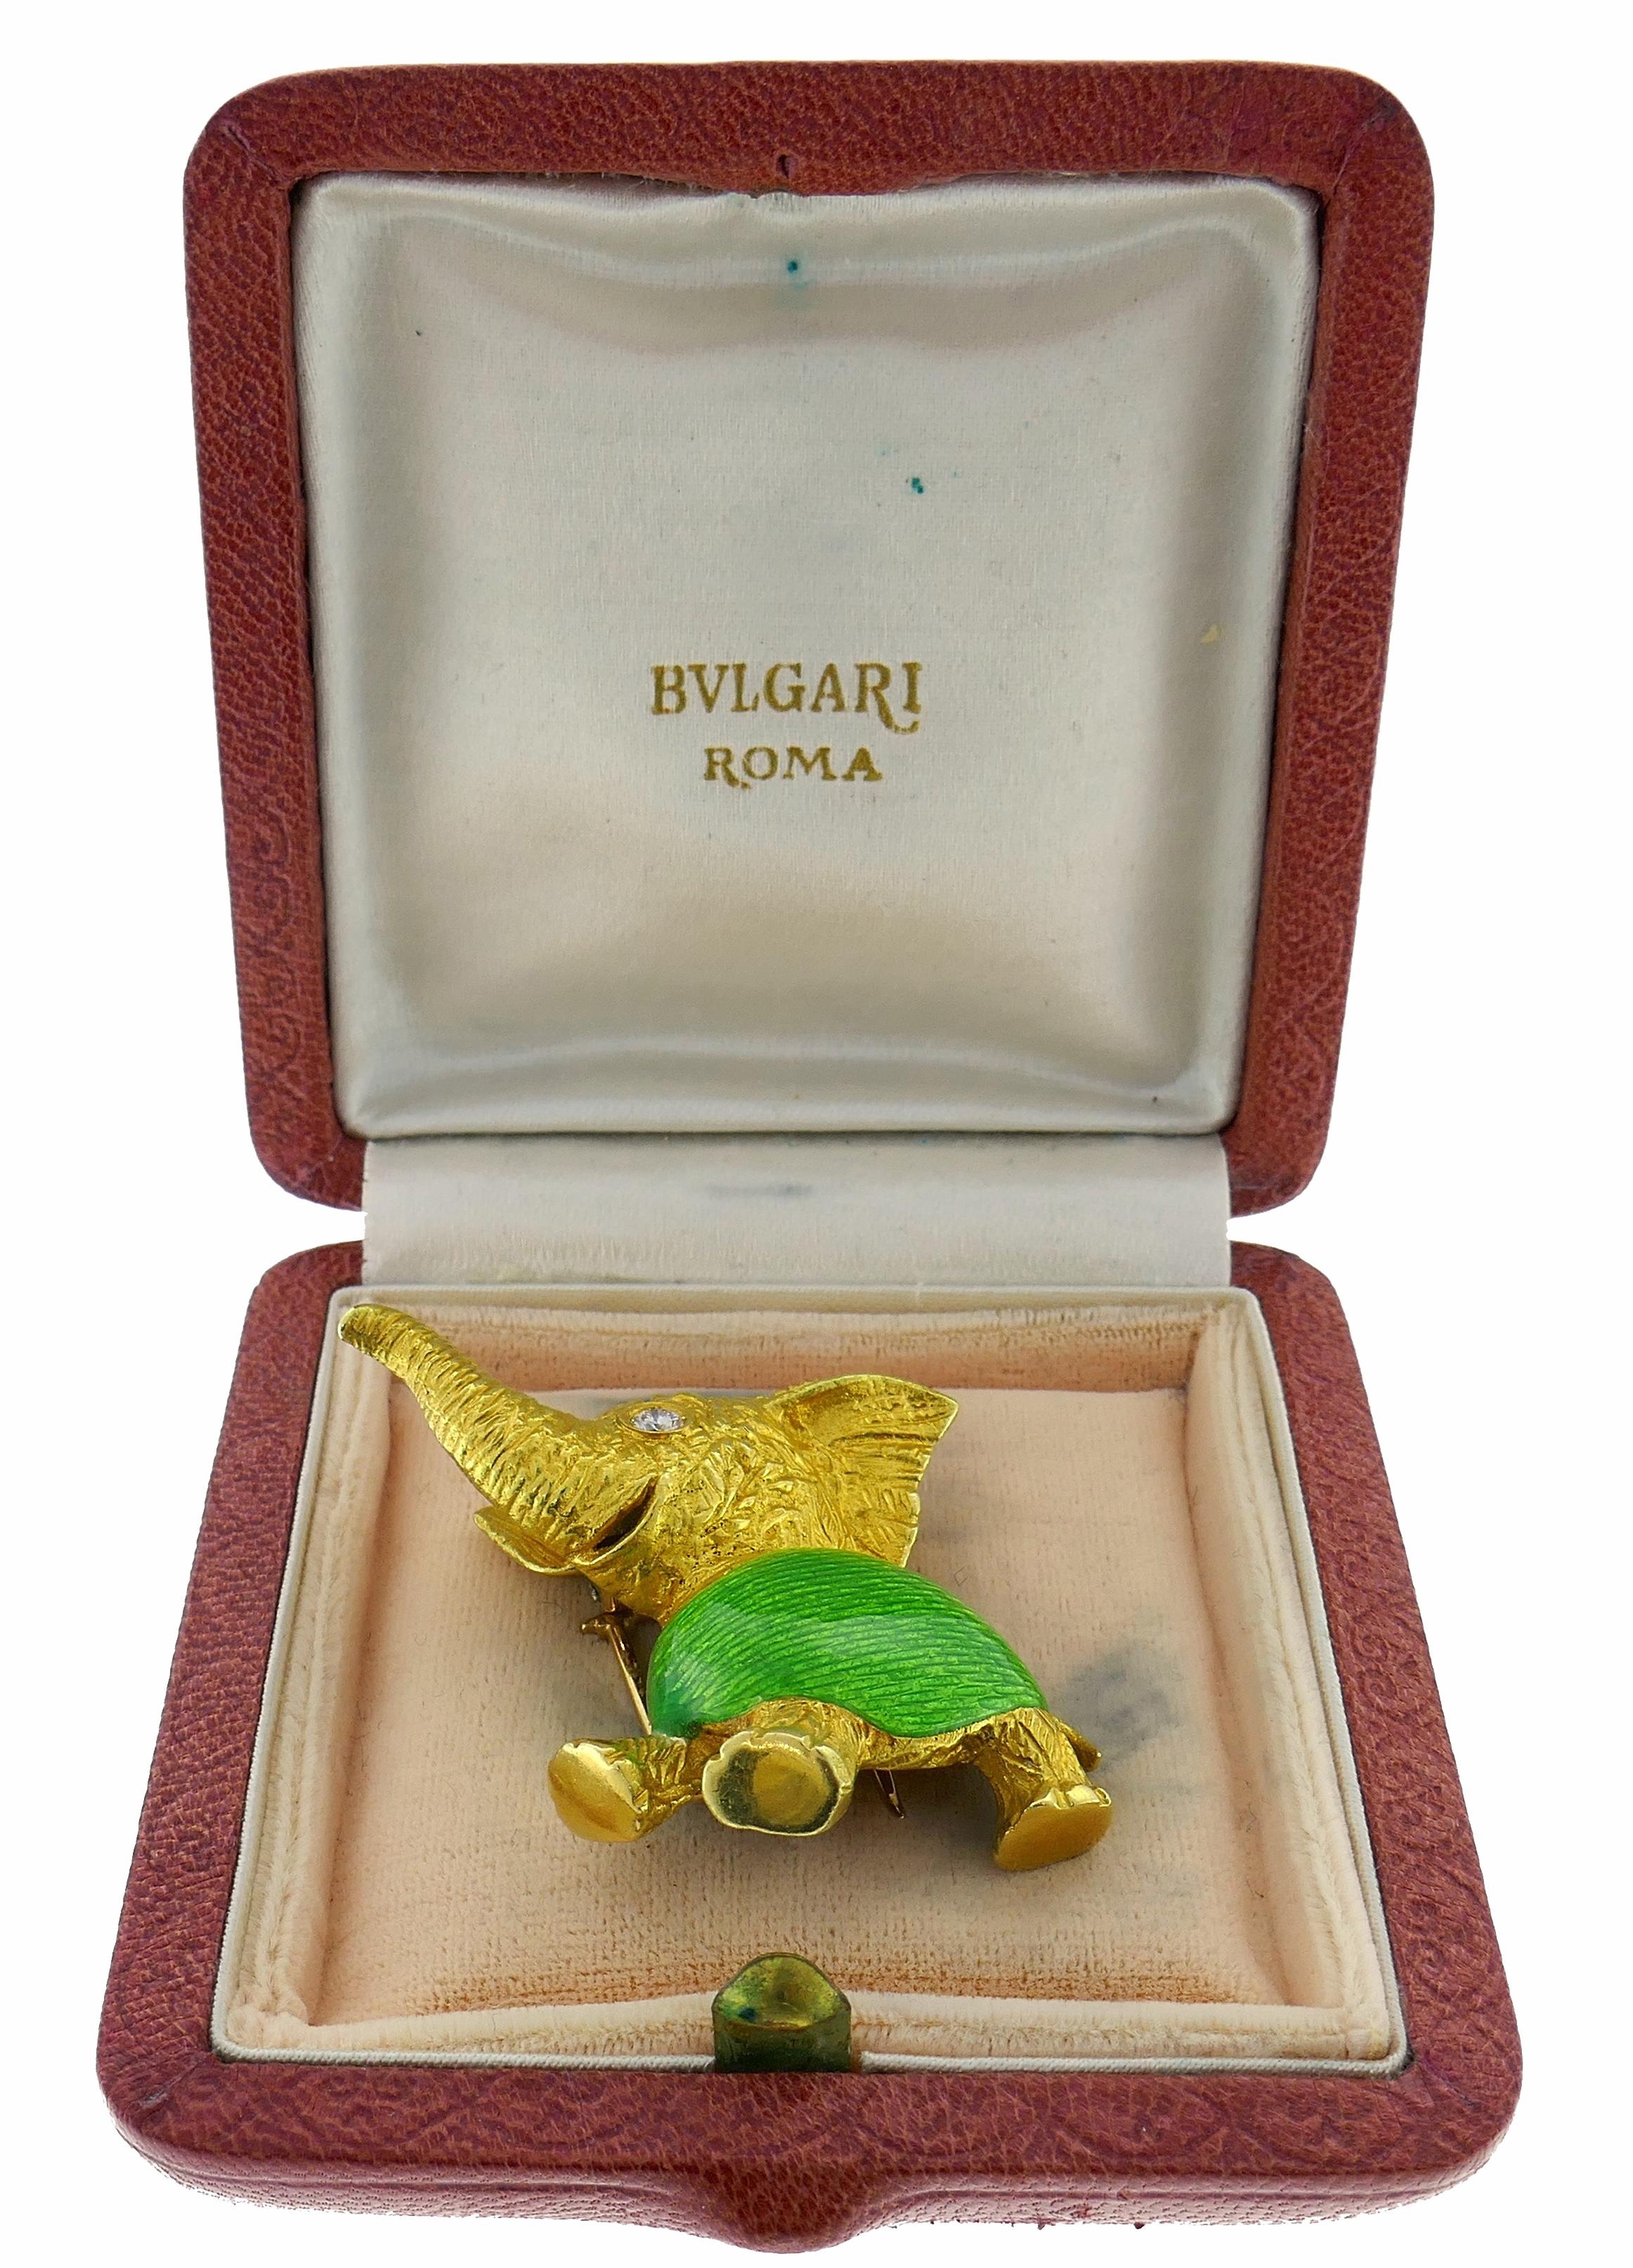 Cute elephant pin created by Bulgari in the 1960s. An elephant is a symbol of will and power.  Colorful, joyful and wearable, the pin is a great addition to your jewelry collection.

The brooch is made of 18 karat yellow gold and enamel, the